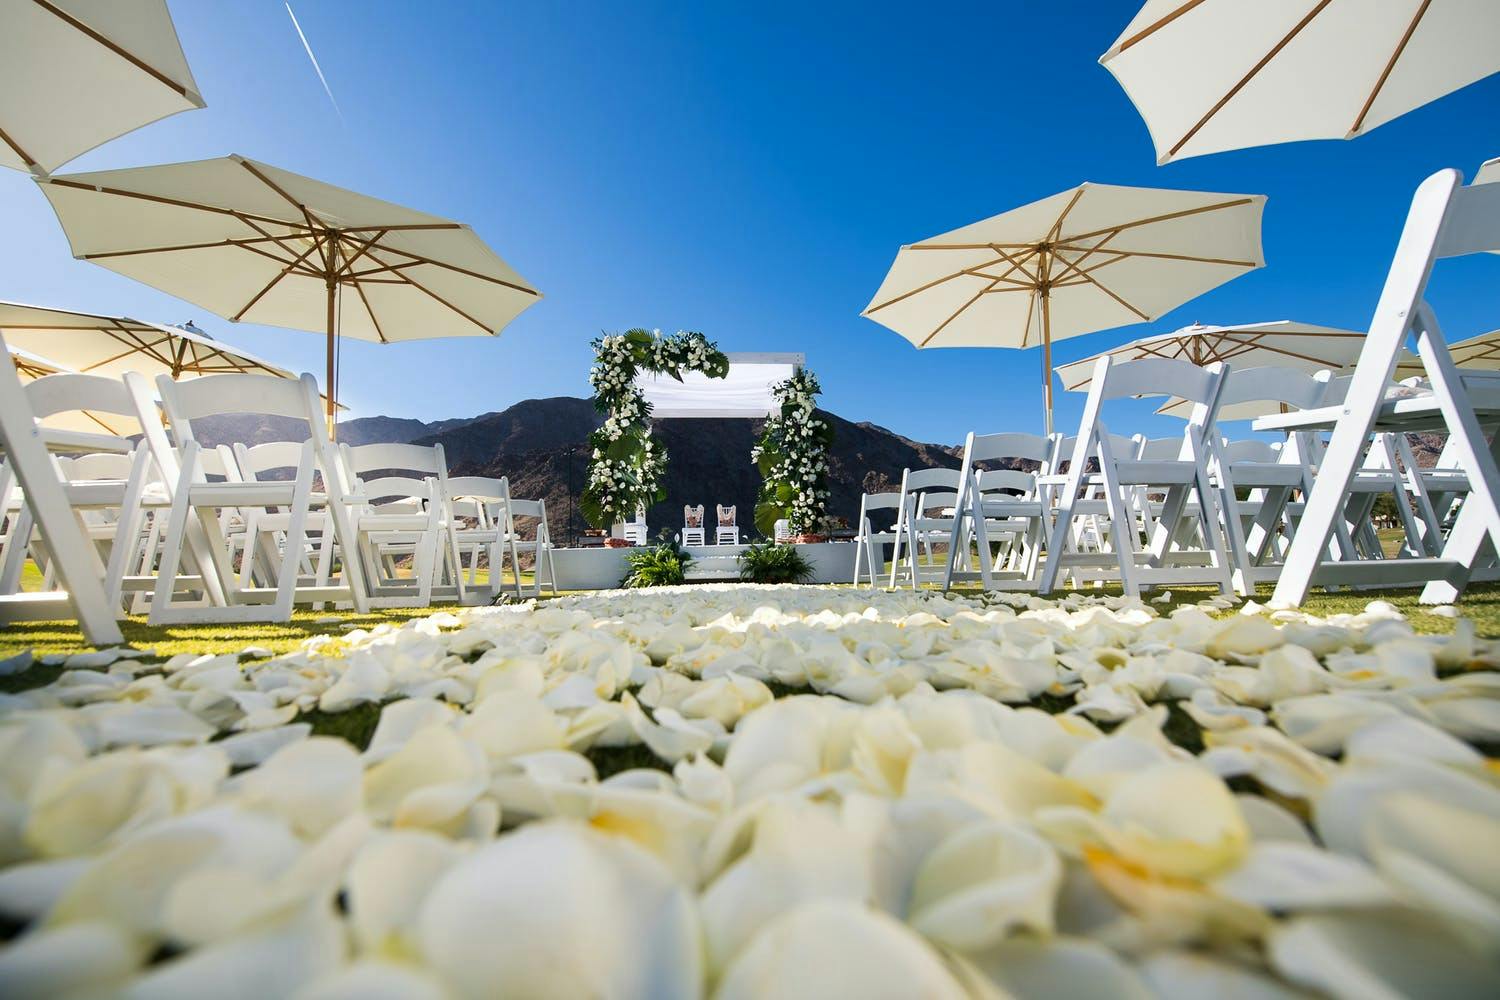 Desert wedding with white petals on aisle lined with white shady umbrellas | PartySlate